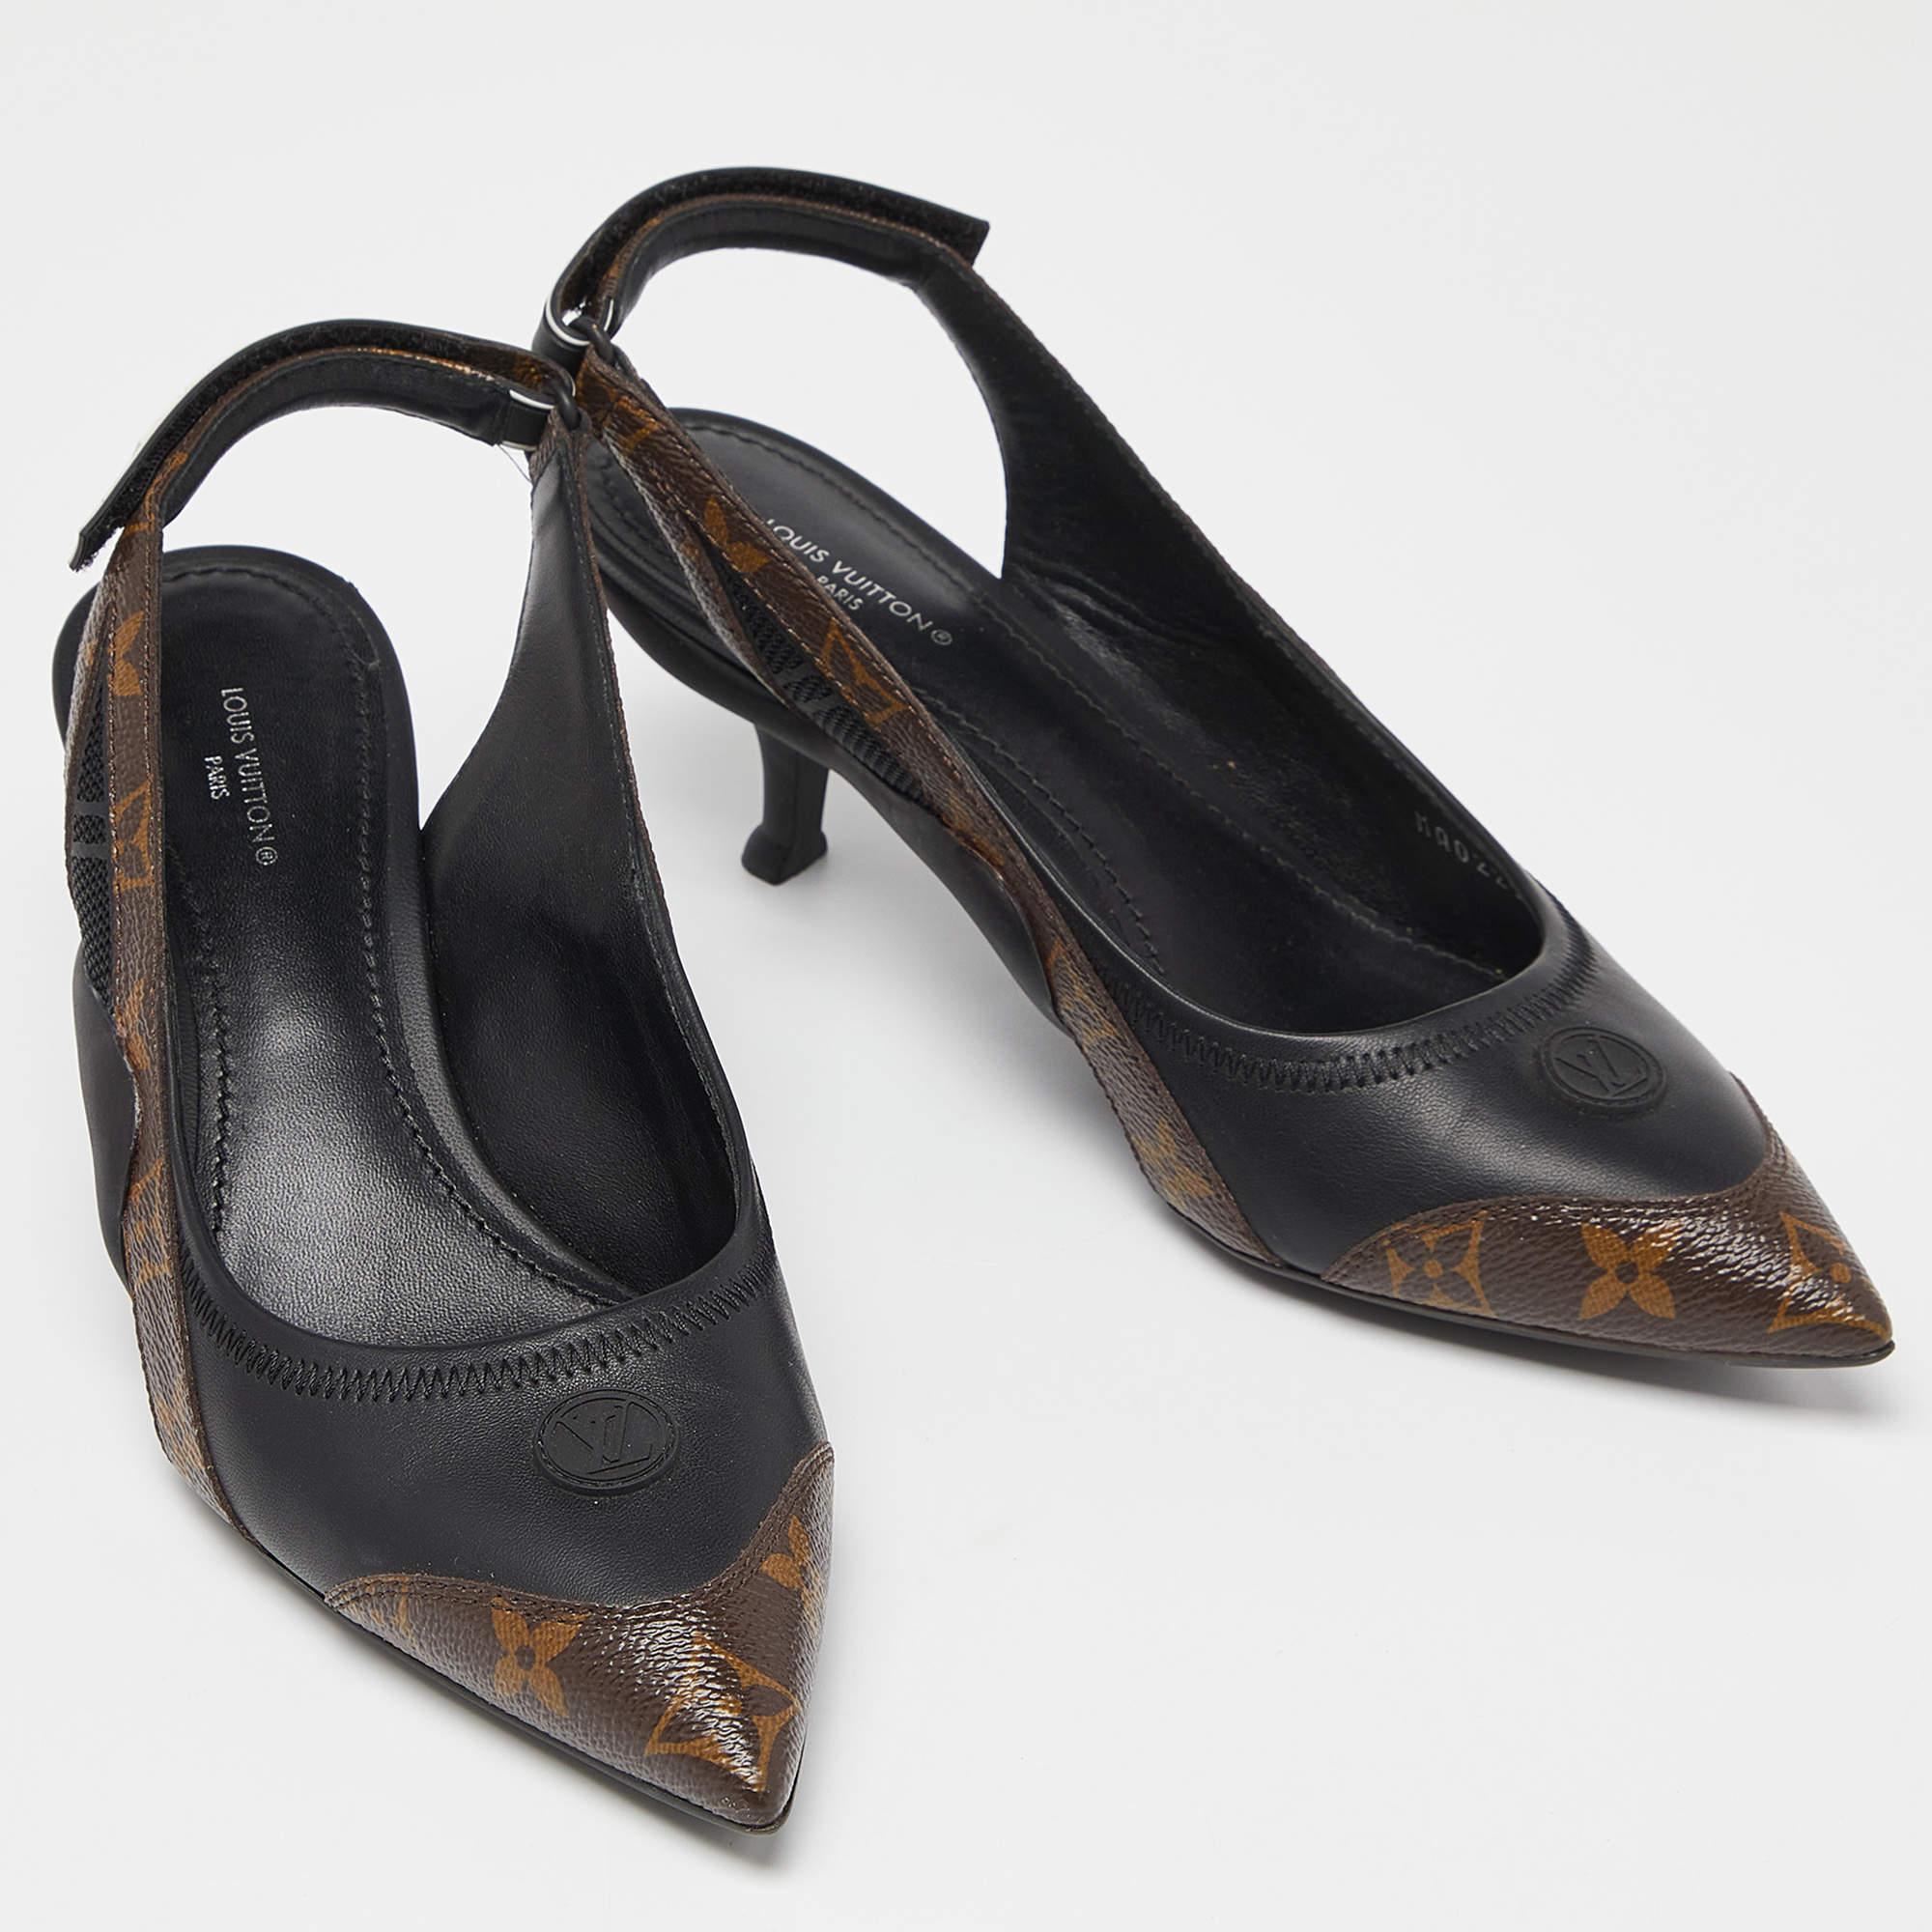 Make a chic style statement with these LV slingback pumps. They showcase kitten heels and durable soles, perfect for your fashionable outings!

